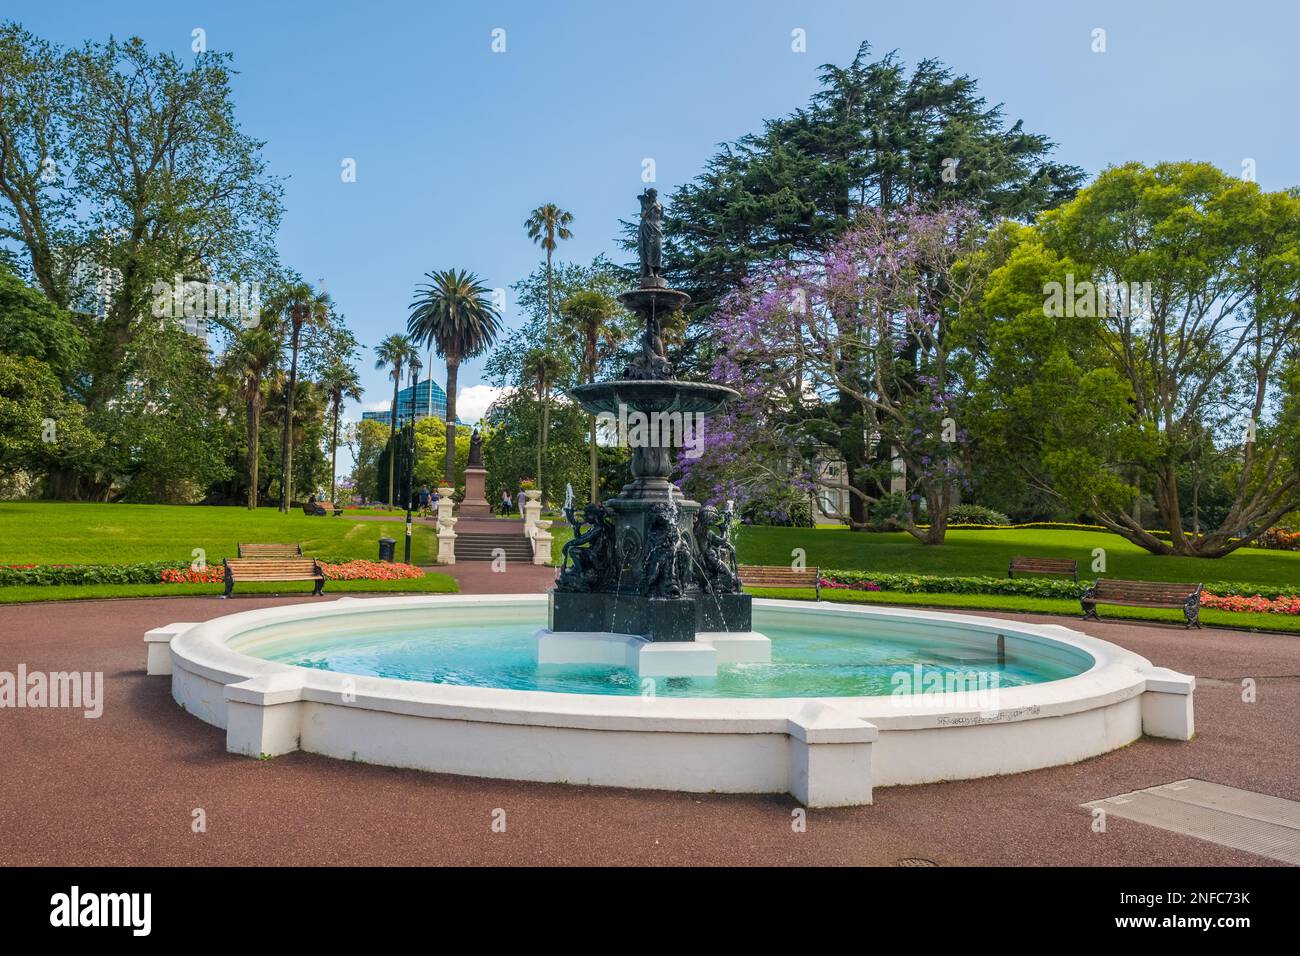 Albert Park, Auckland, New Zealand - December 28th 2022: Fountain in Albert Park in the city of Auckland, New Zealand with Jacaranda and palm trees in Stock Photo